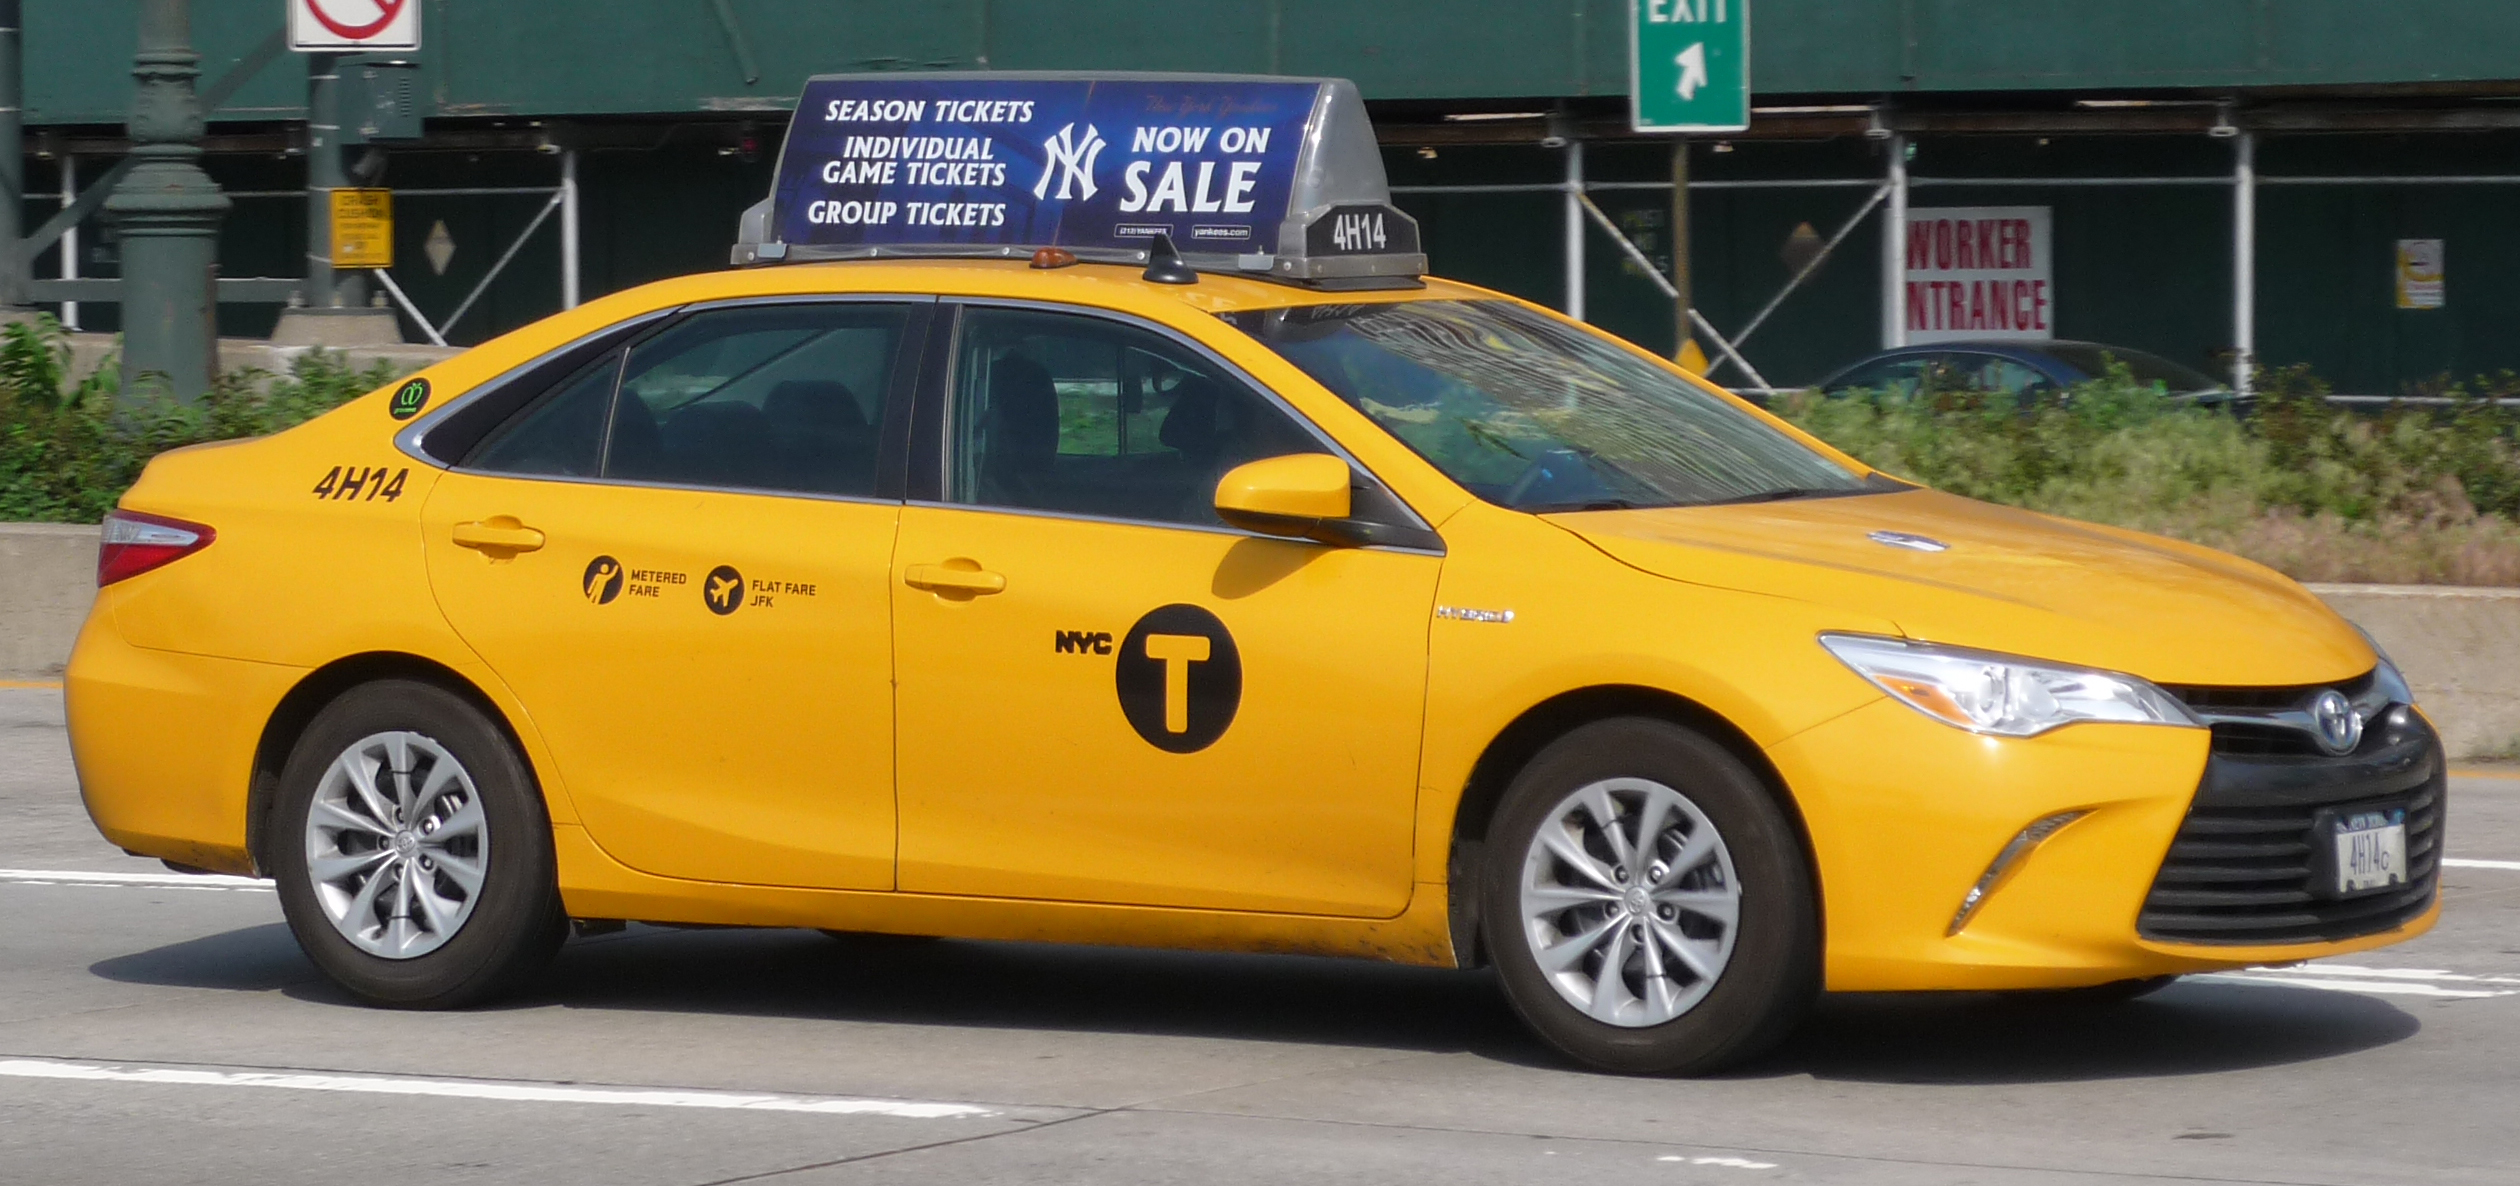 NYC Hybrid Taxi & Carbon Neutral Fuel